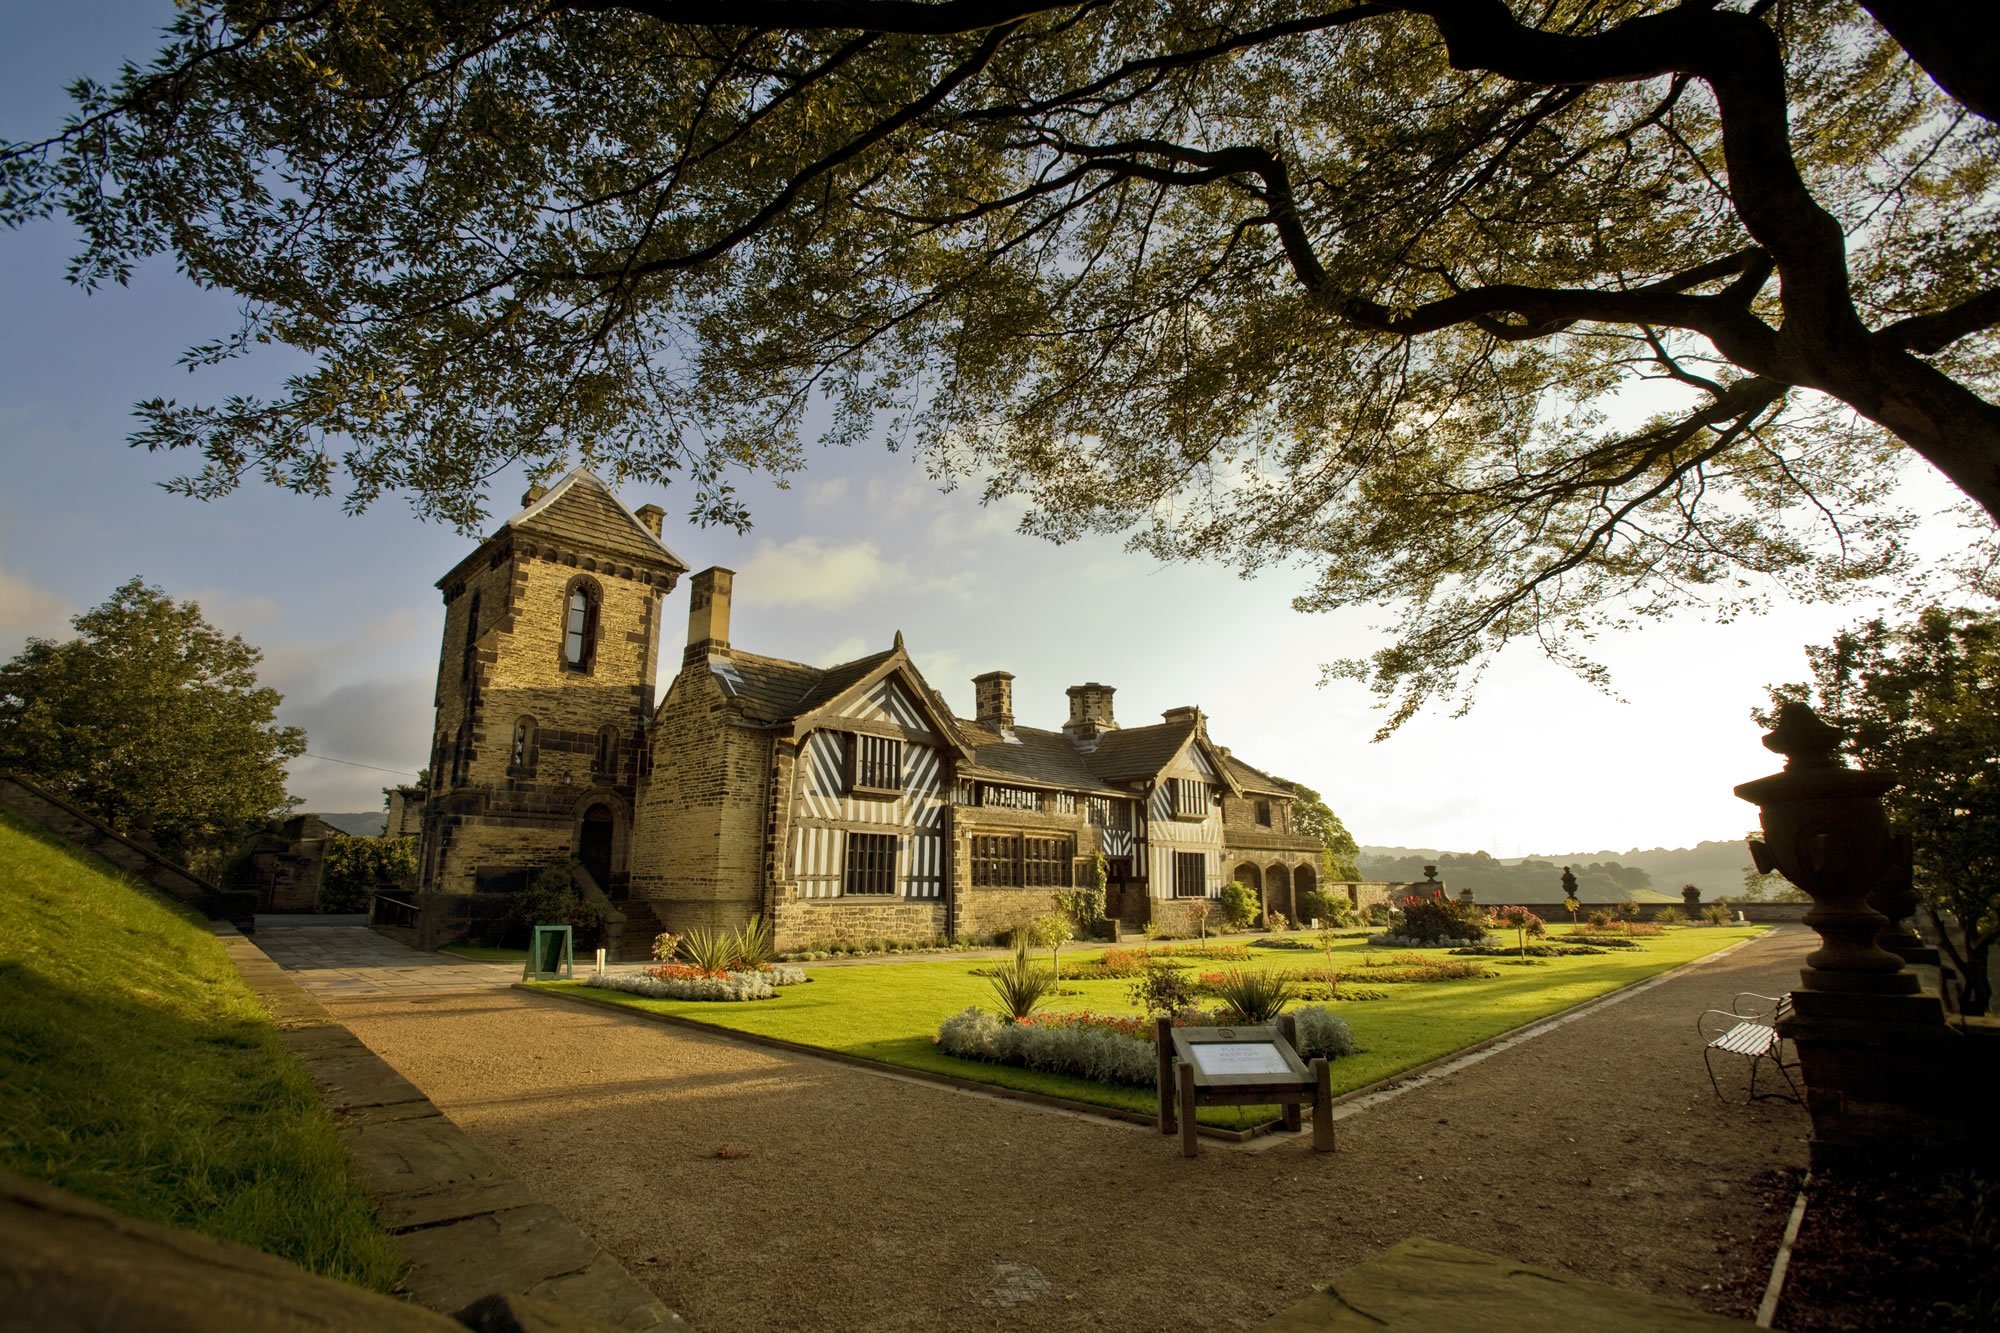 Image name Shibden Hall the 16 image from the post Visitor Attractions in Yorkshire.com.